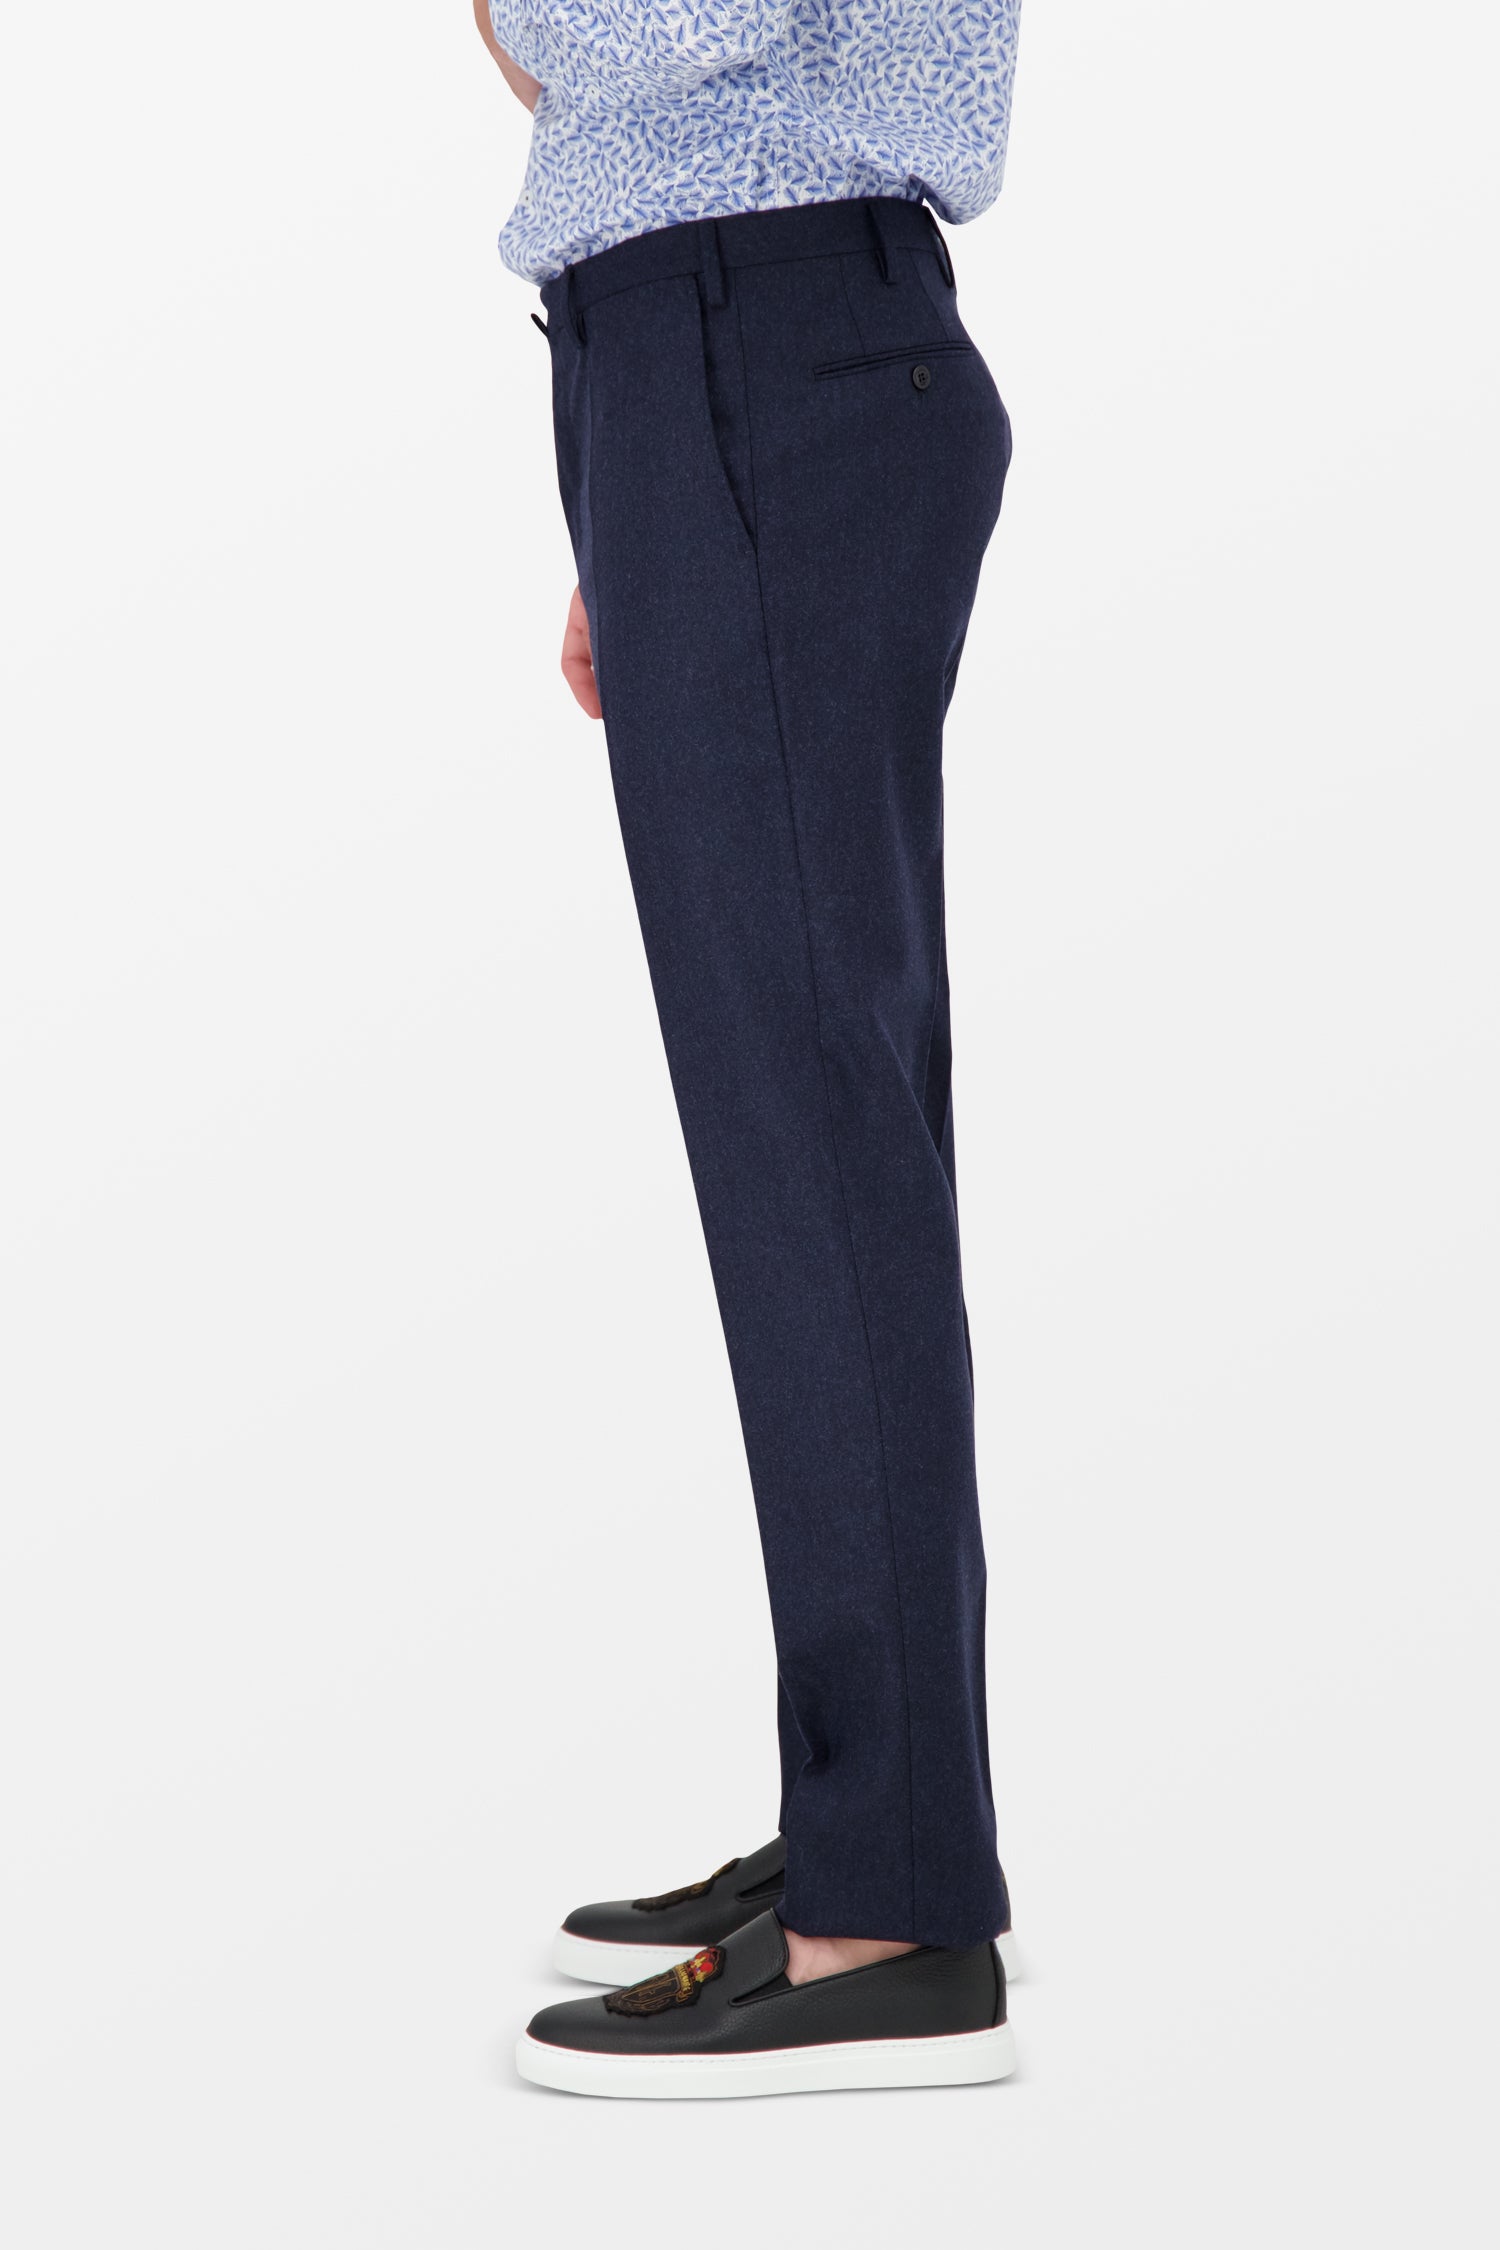 Incotex Navy Trousers